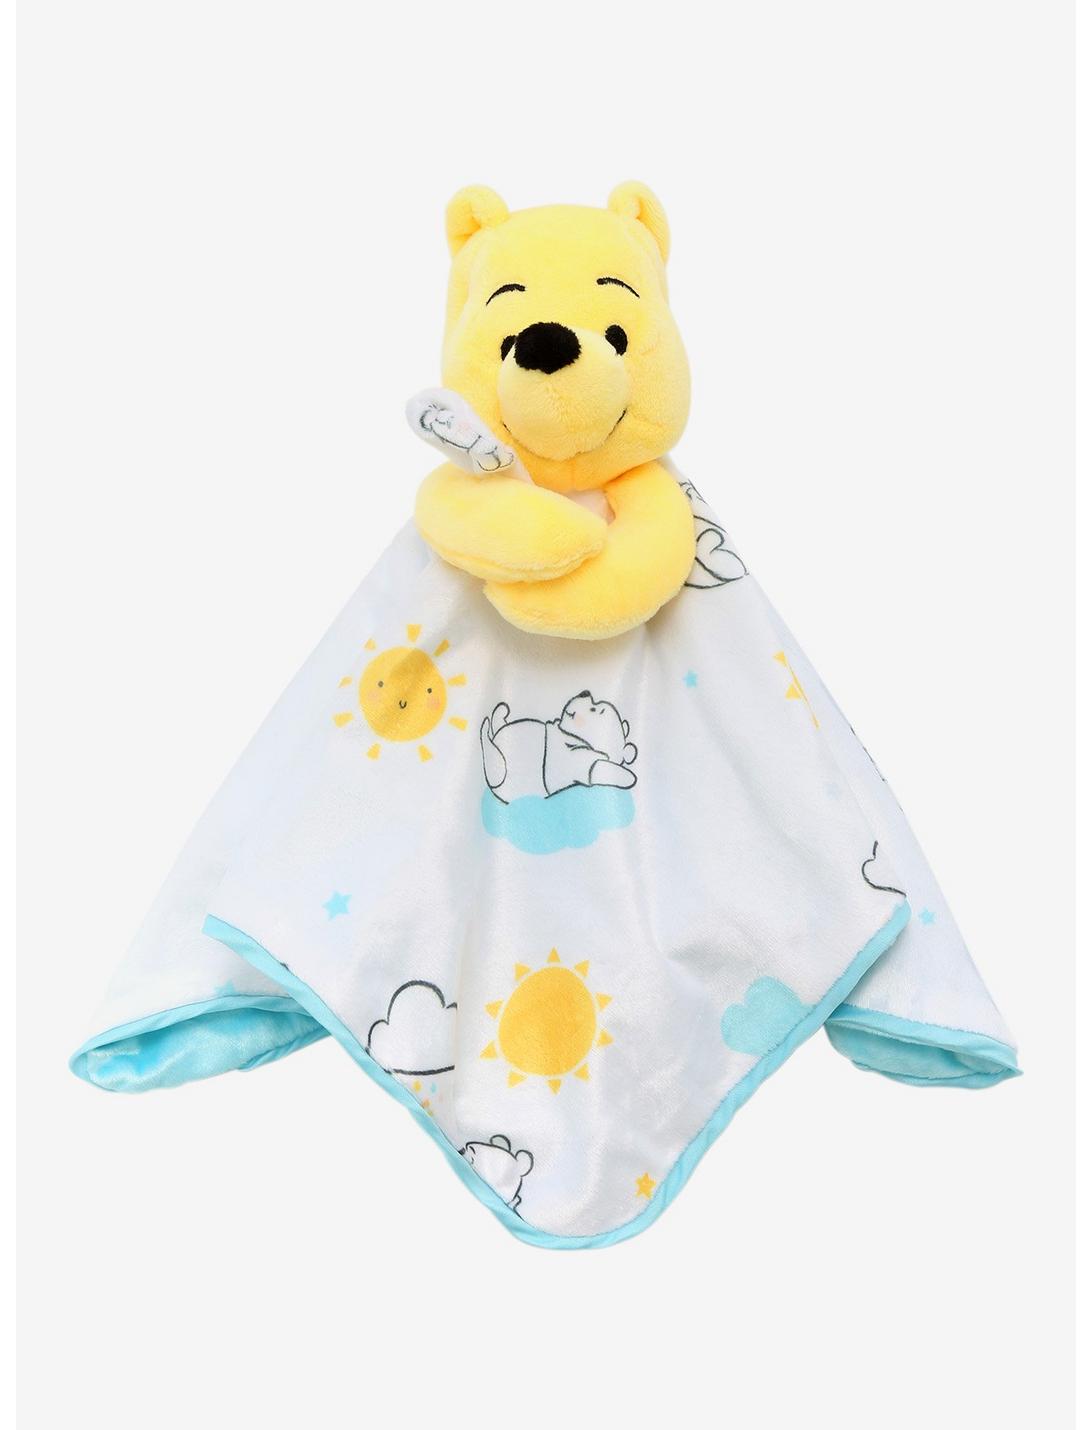 Disney Winnie the Pooh Security Blanket - BoxLunch Exclusive, , hi-res